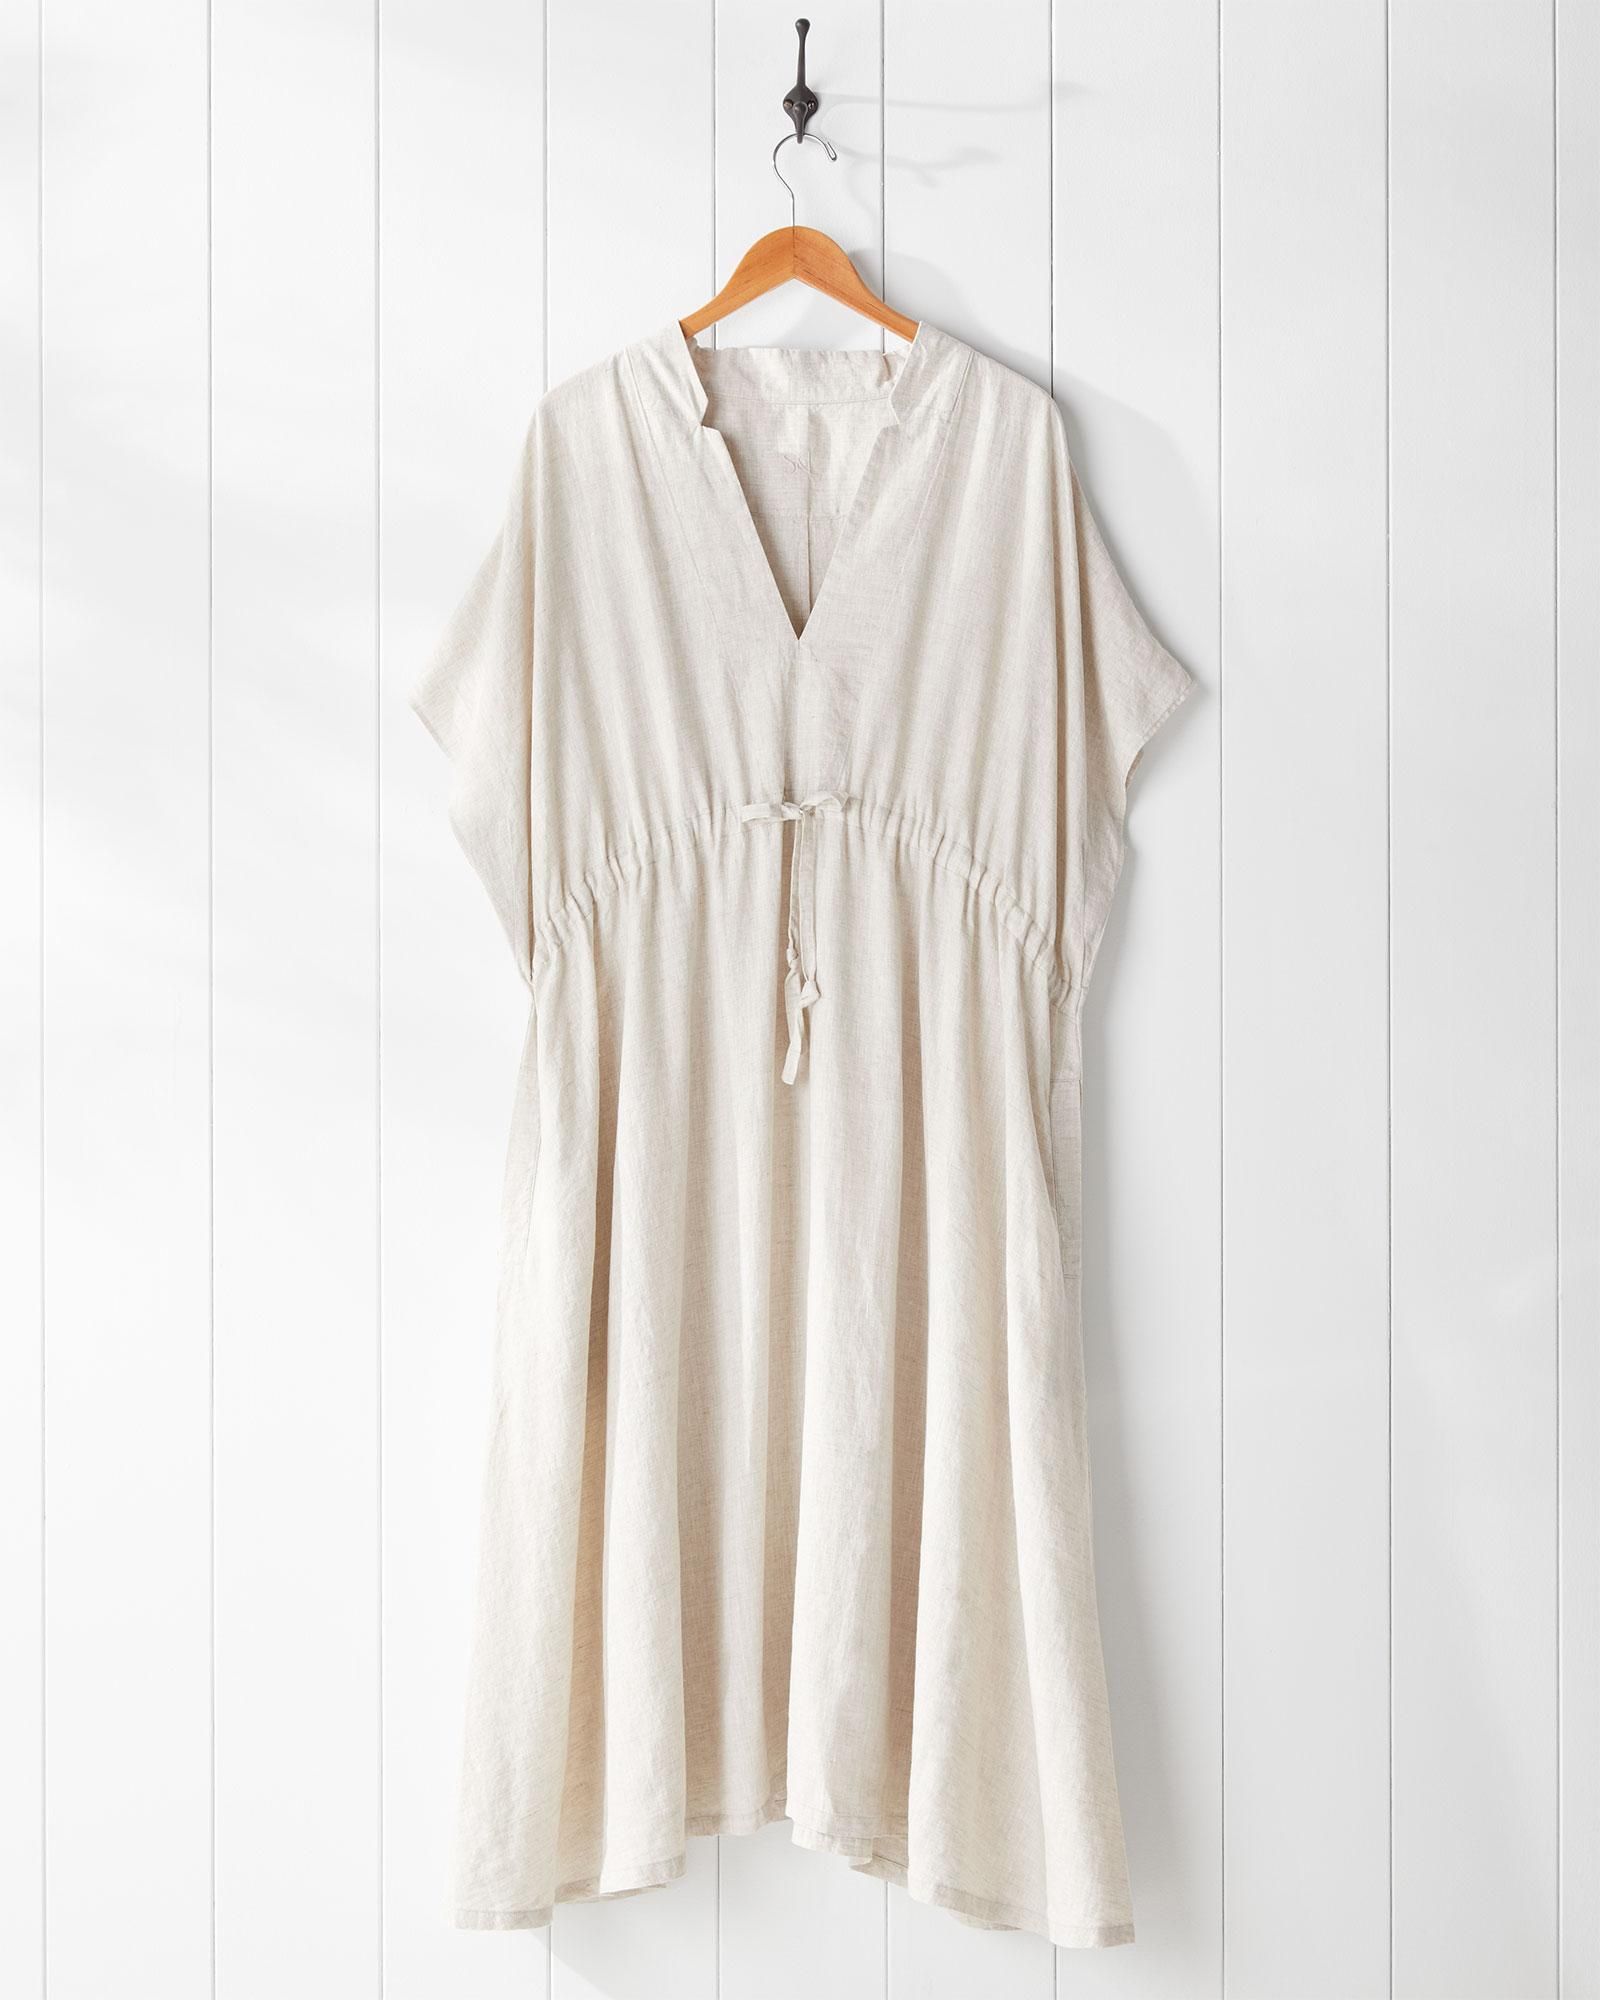 Beach House Dress | Serena and Lily